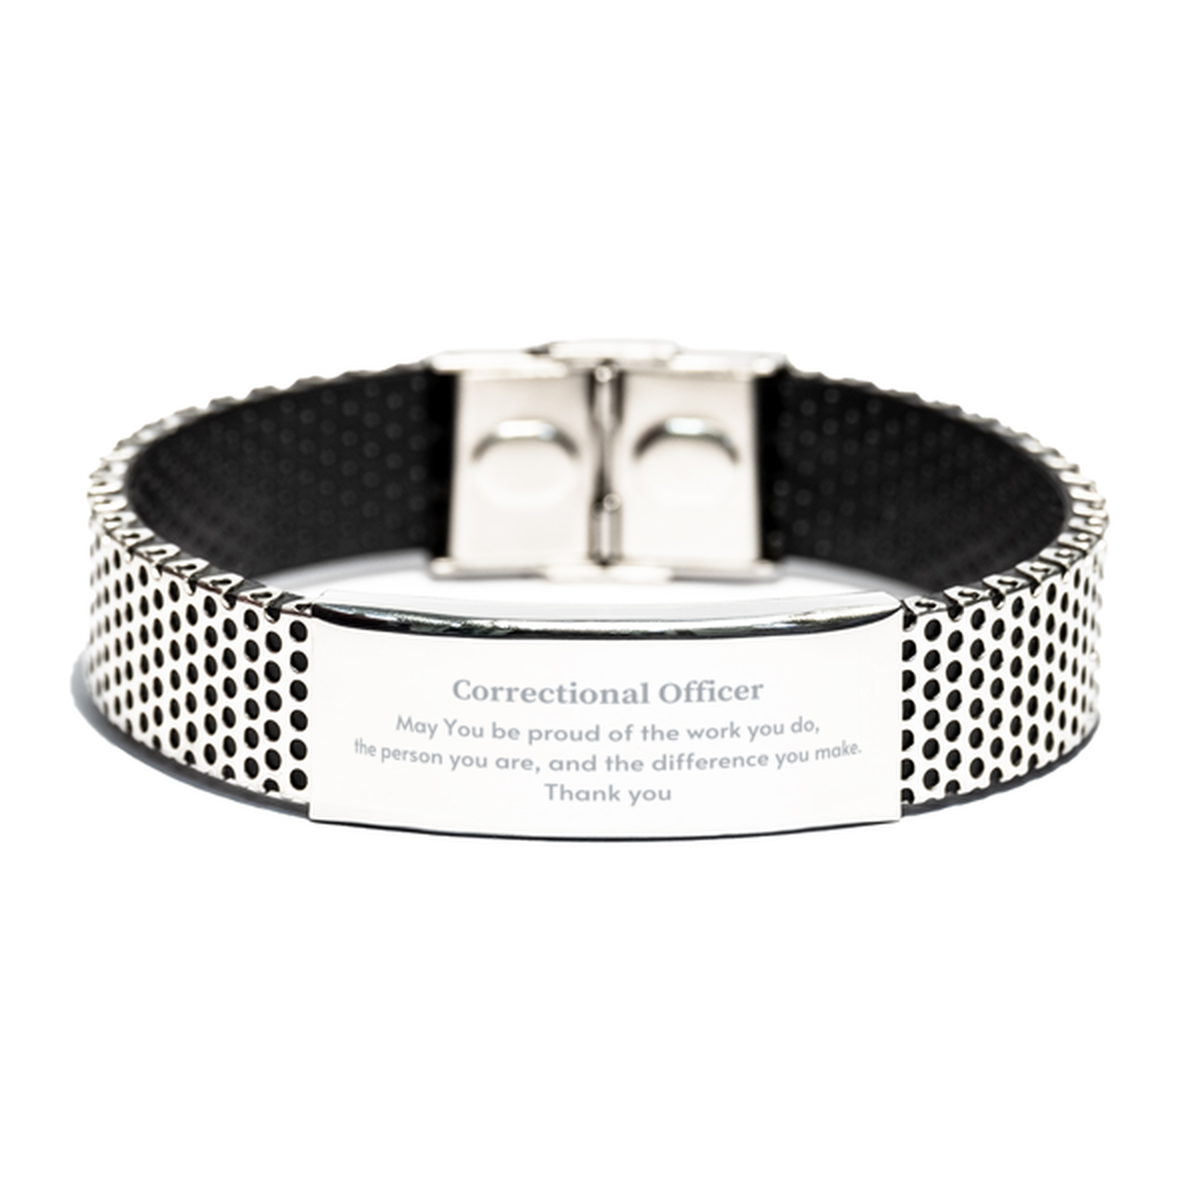 Heartwarming Stainless Steel Bracelet Retirement Coworkers Gifts for Correctional Officer, Correctional Officer May You be proud of the work you do, the person you are Gifts for Boss Men Women Friends